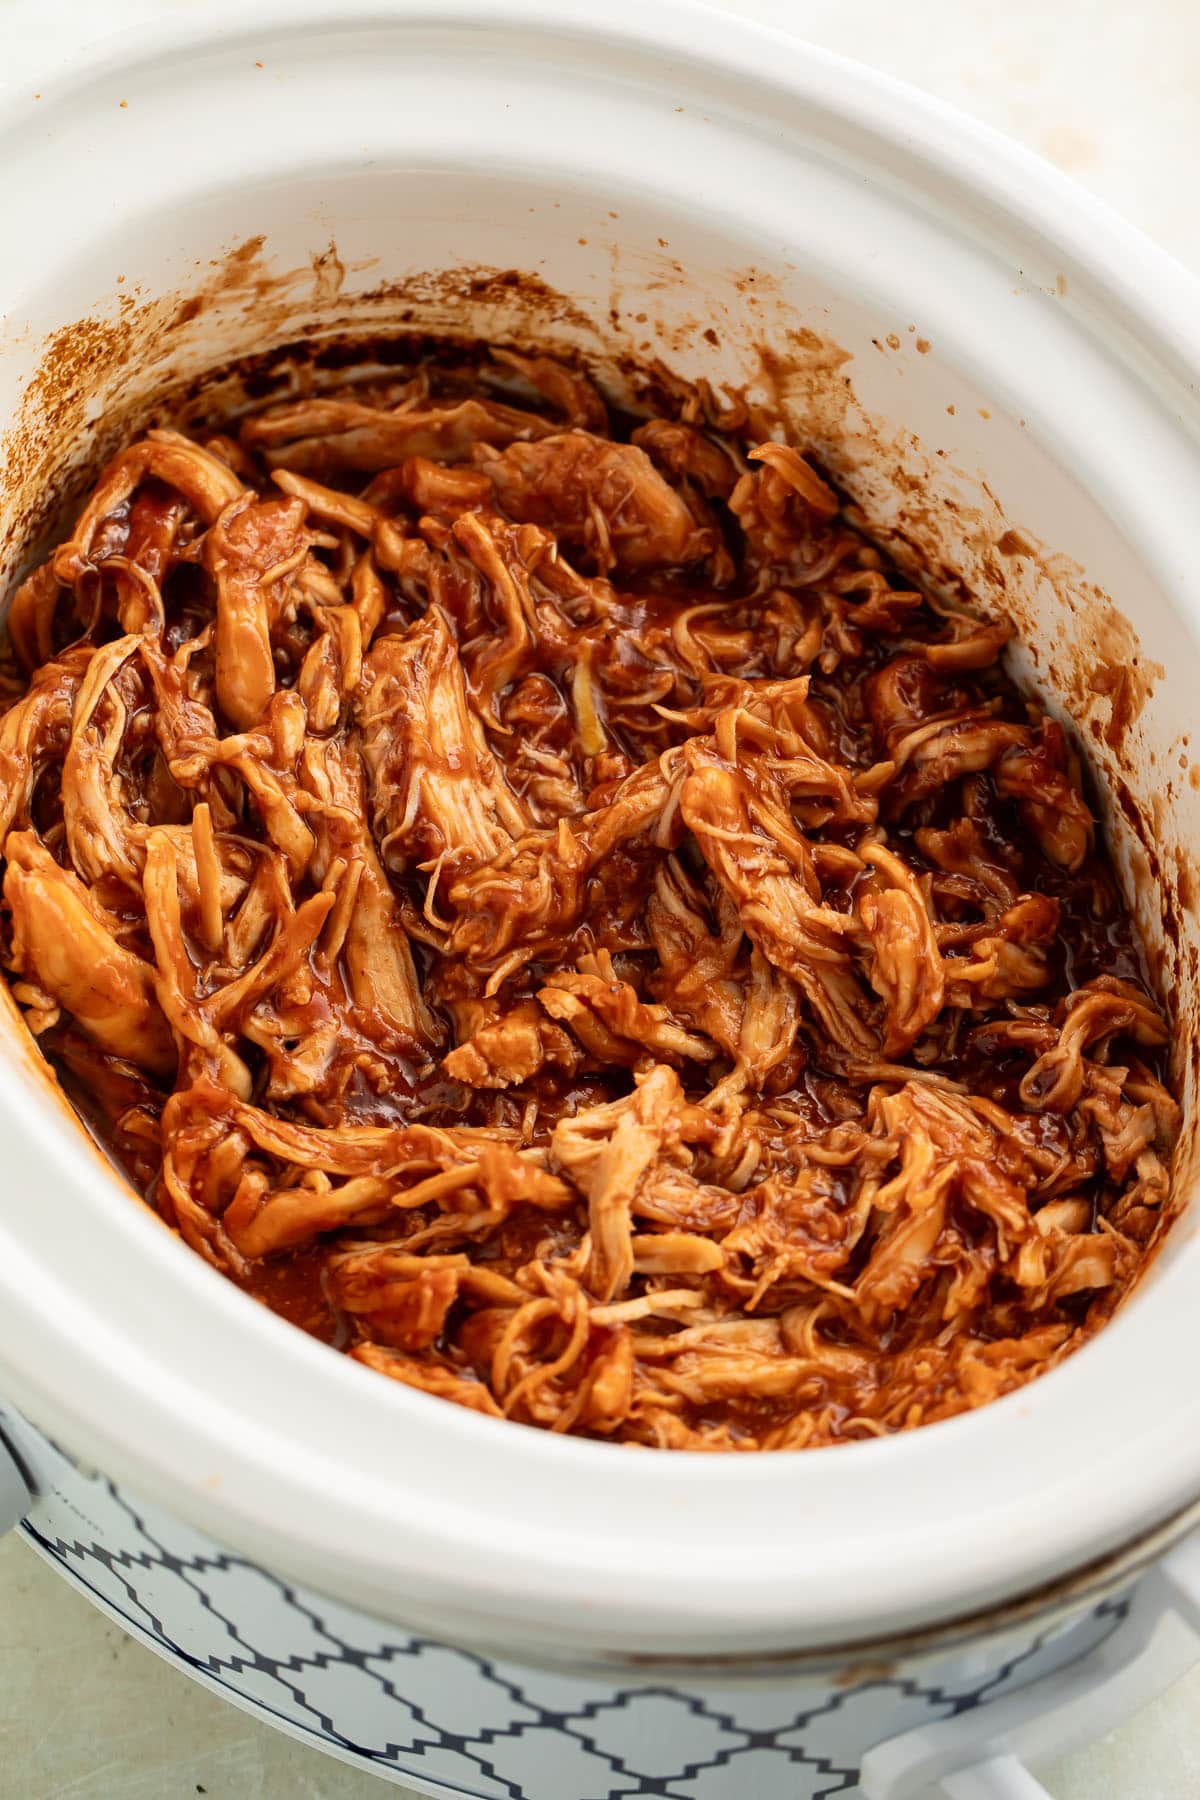 Pulled BBQ chicken in a white Crockpot sitting on a table.